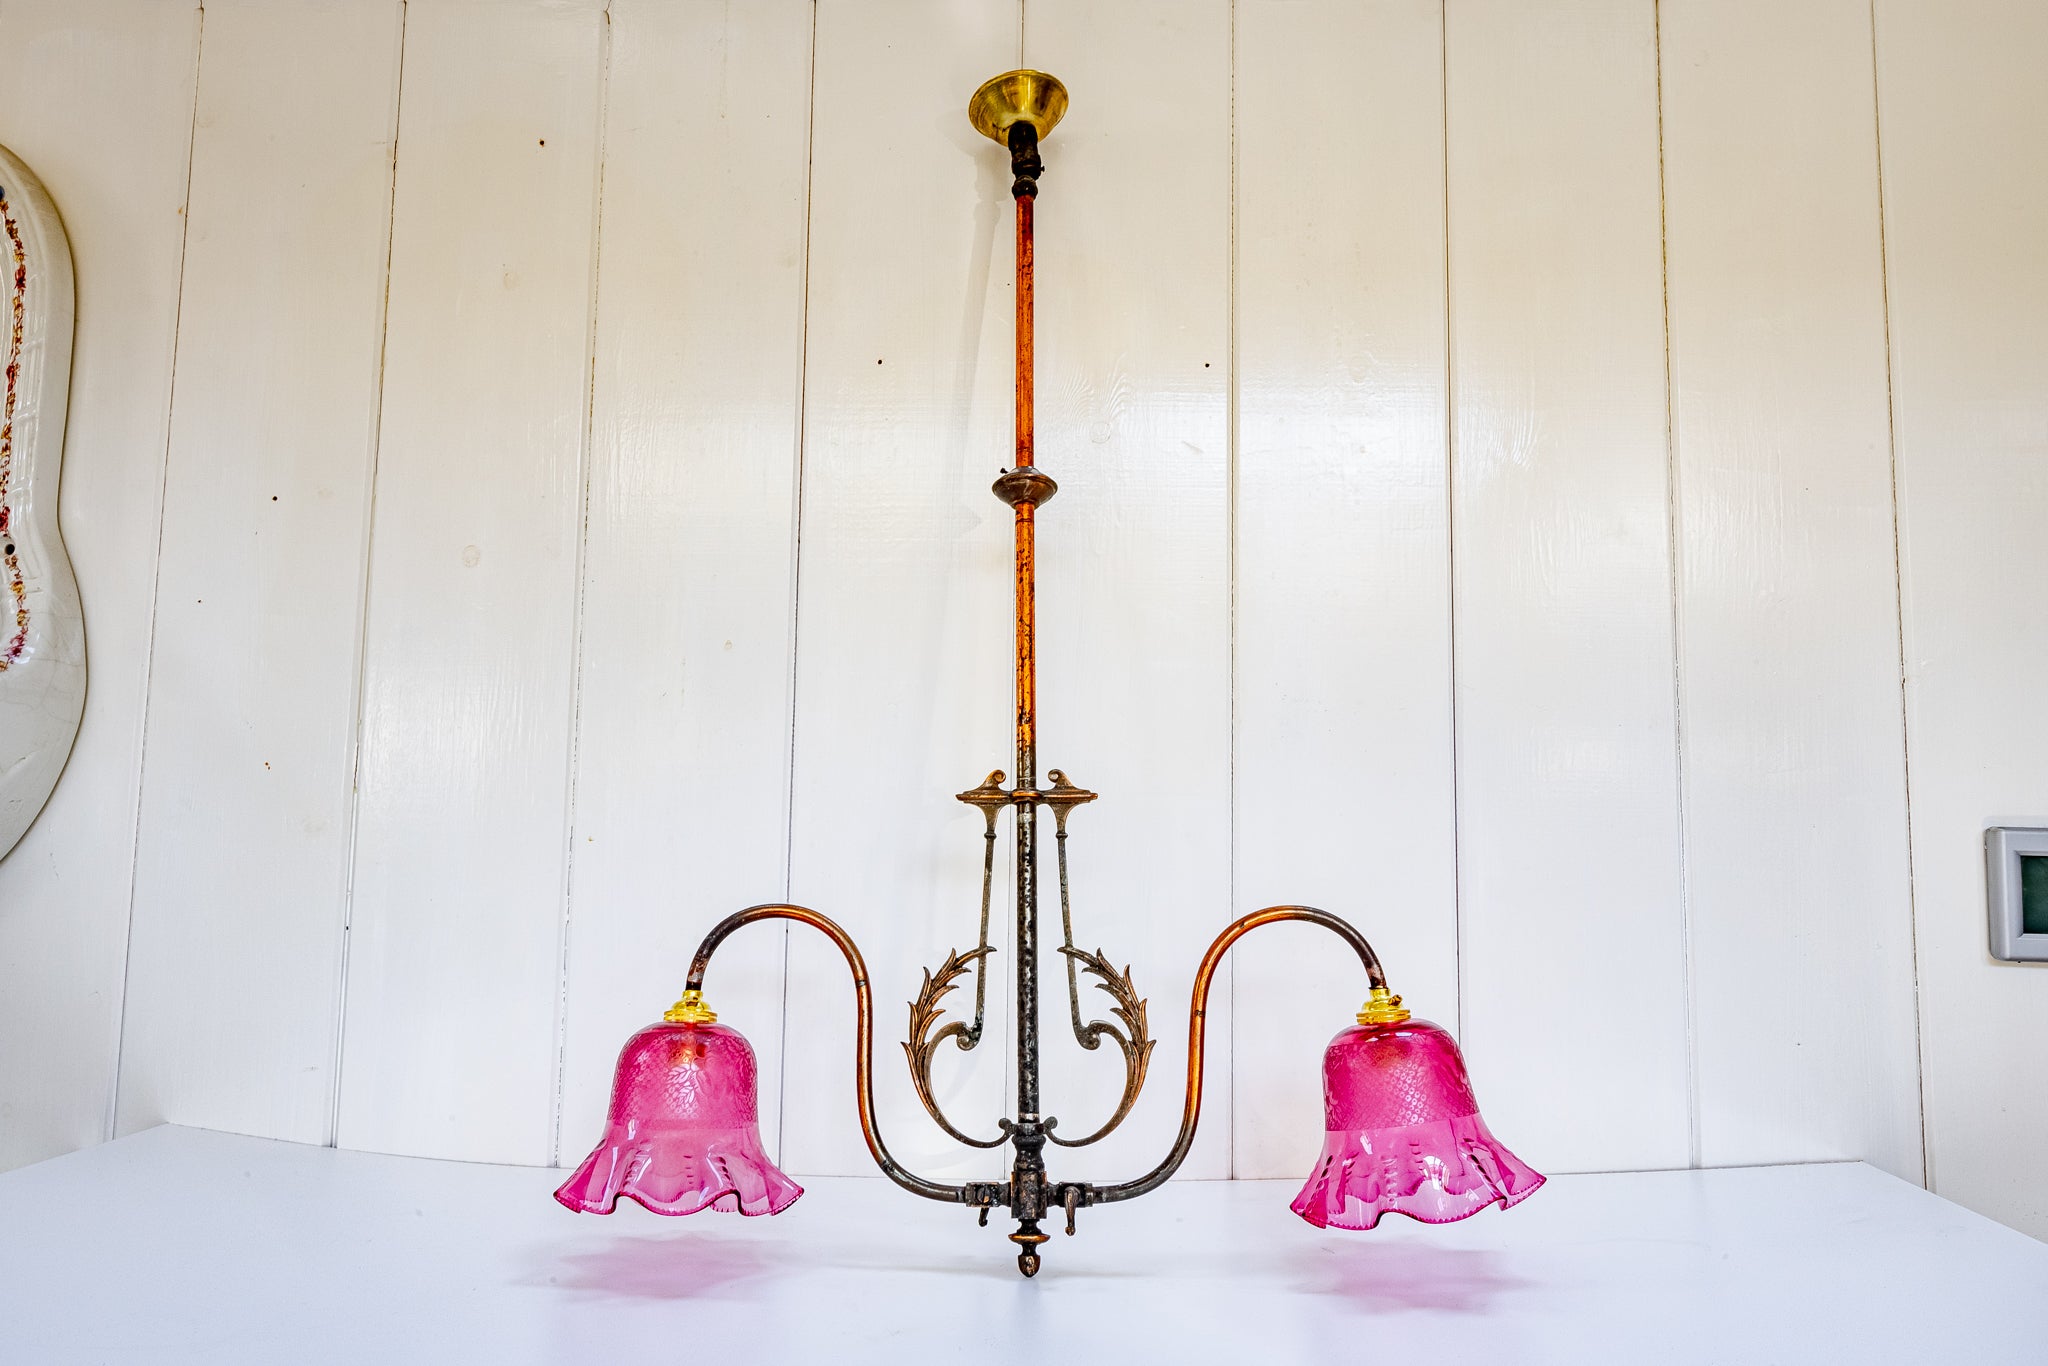 edwardian 2-arm over table gas lamp with antique cranberry shades c.1905